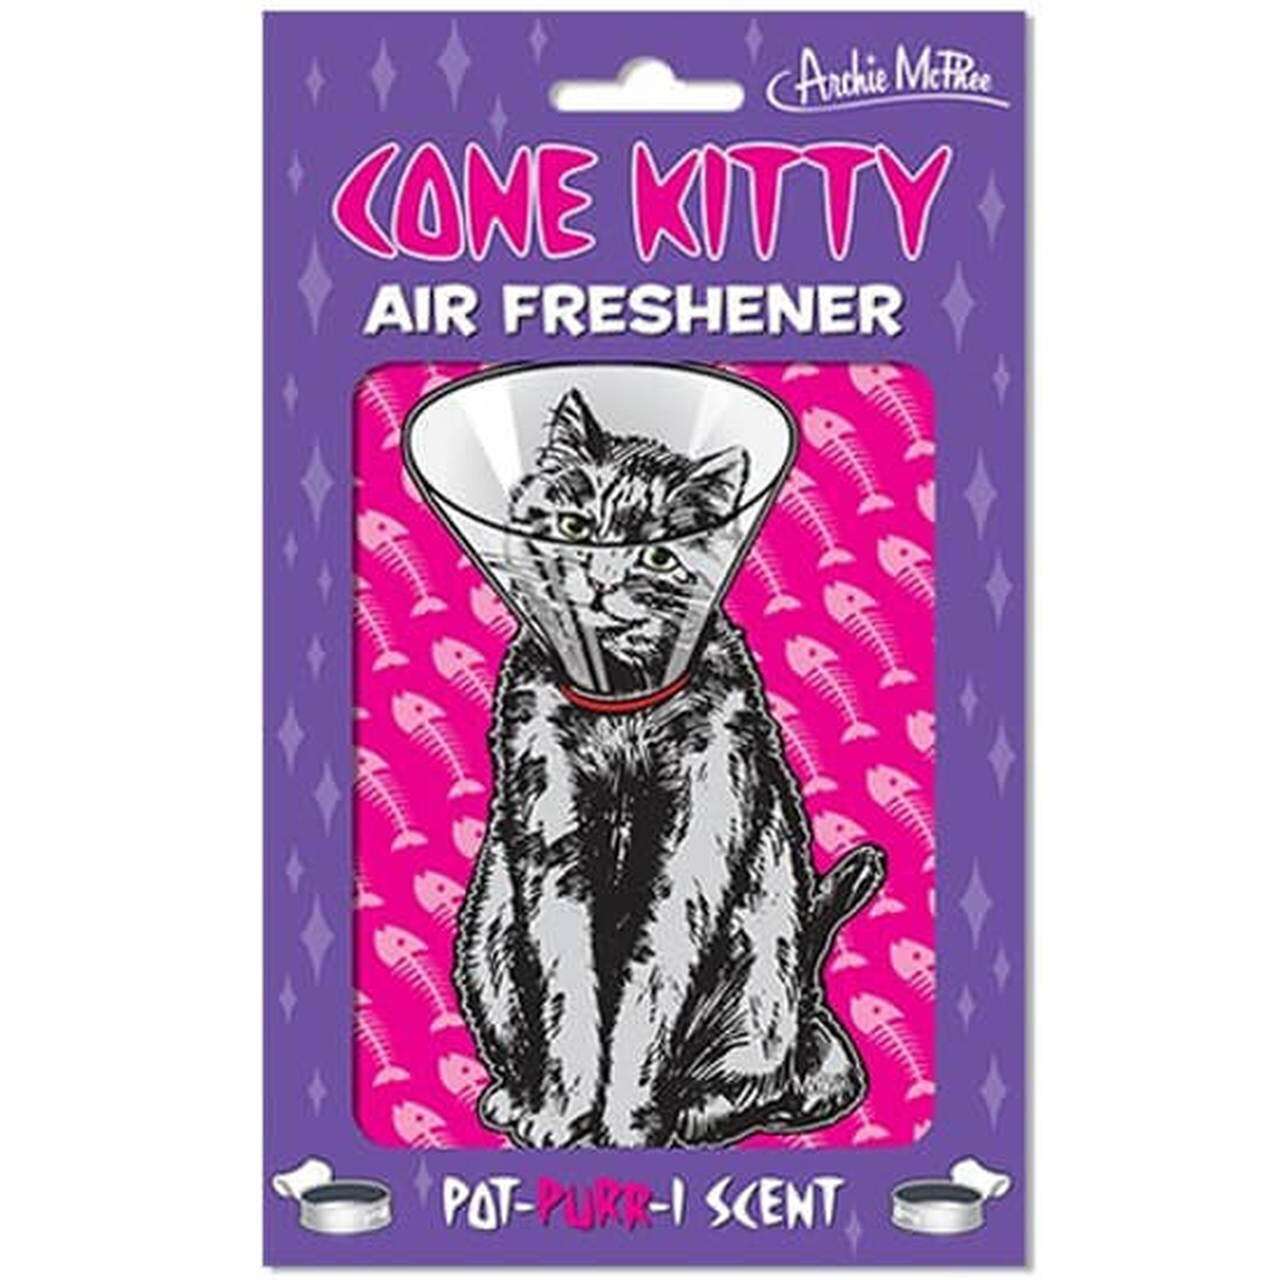 Cone Kitty Pot-PURR-i Scented Air Freshener